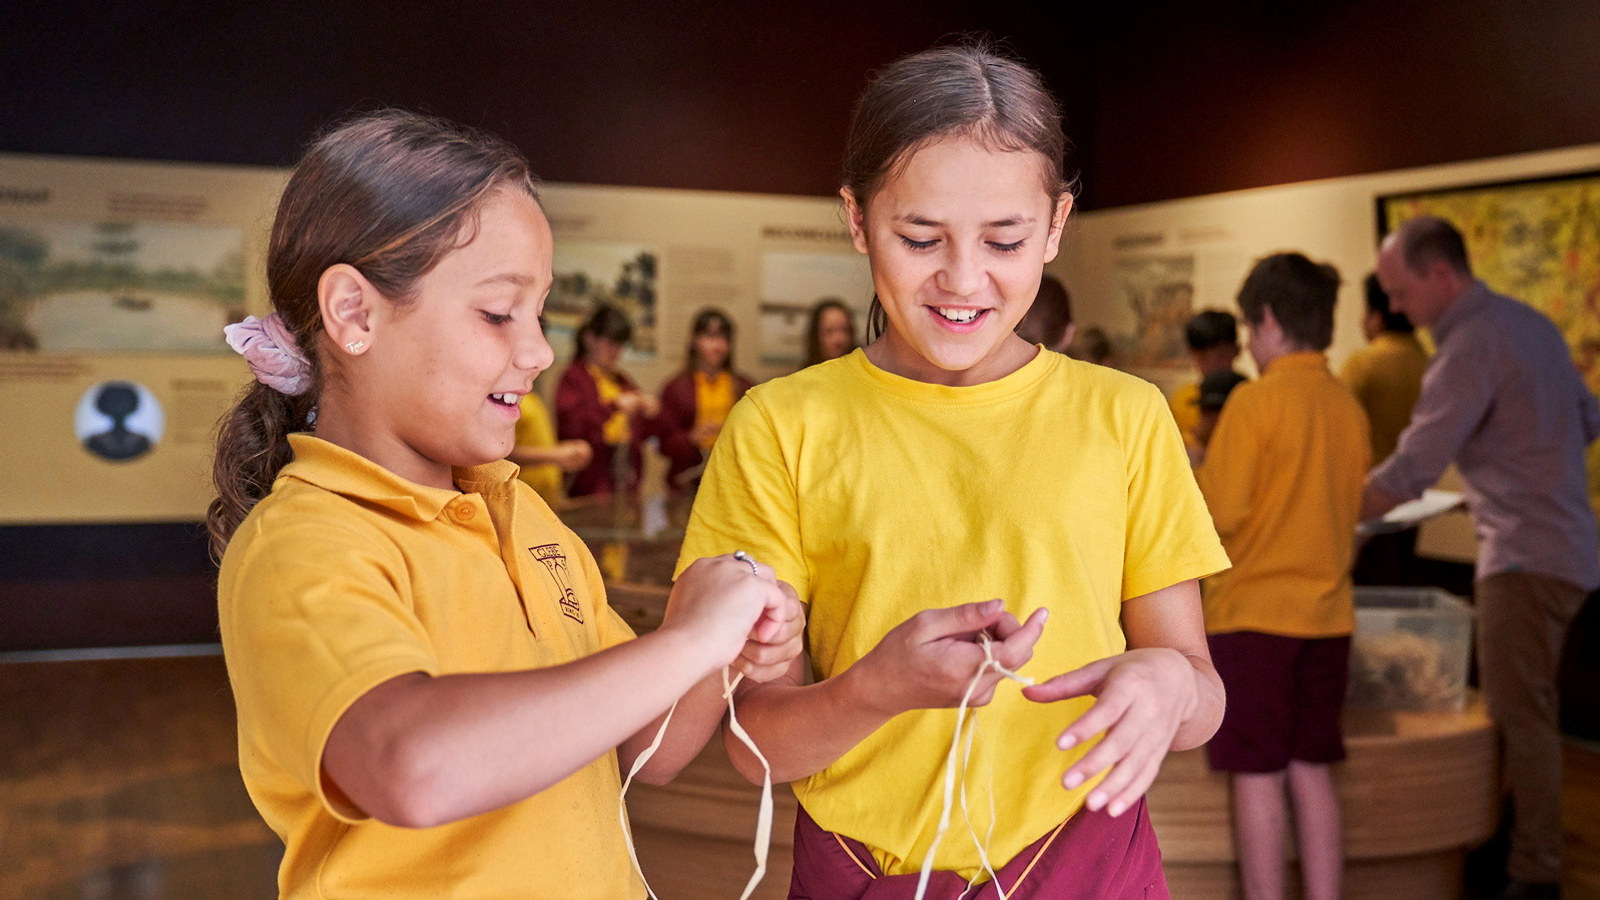 Two girls in school uniform making string in exhibition space with other students behind.